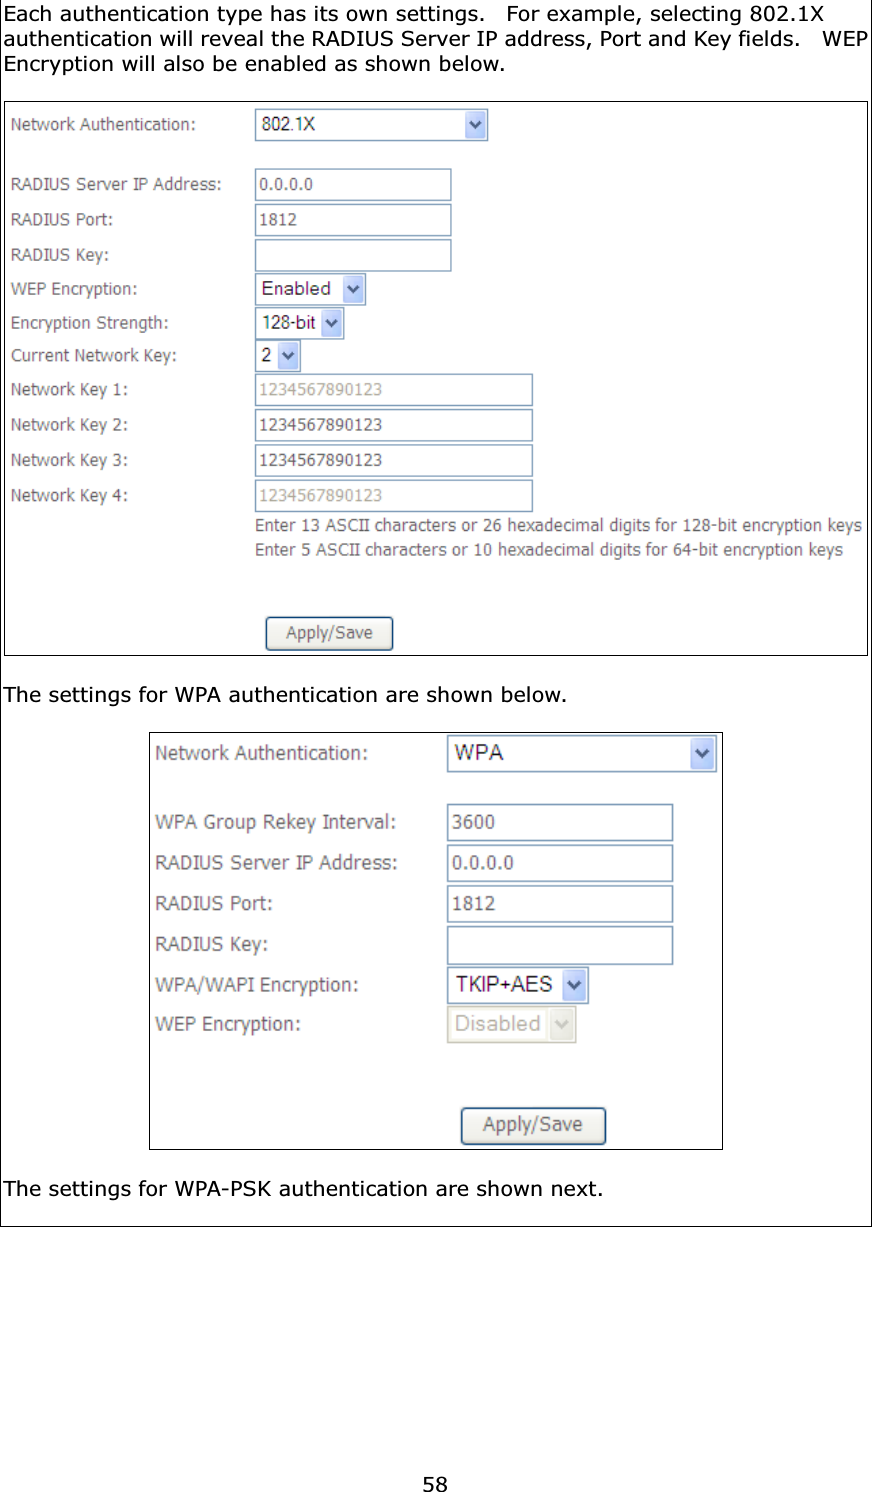  58Each authentication type has its own settings.    For example, selecting 802.1X authentication will reveal the RADIUS Server IP address, Port and Key fields.    WEP Encryption will also be enabled as shown below.   The settings for WPA authentication are shown below.    The settings for WPA-PSK authentication are shown next.  